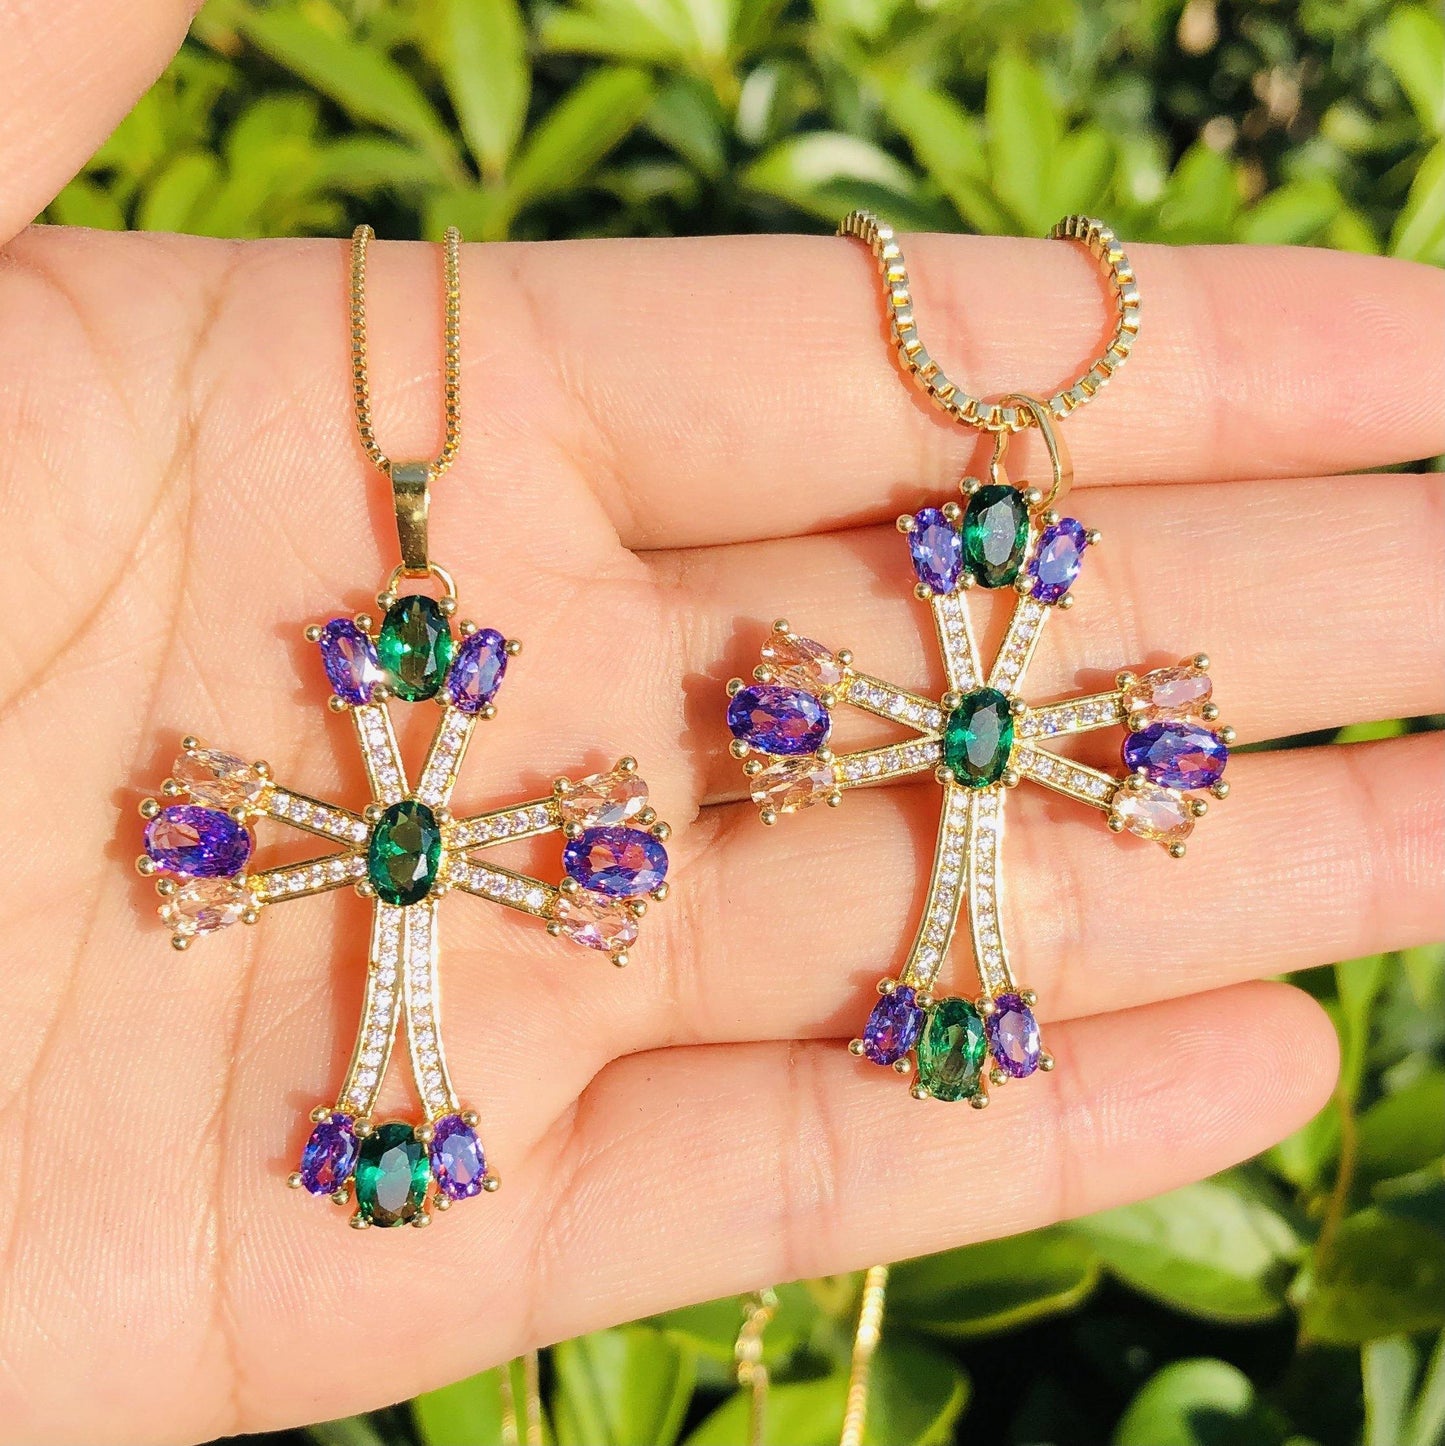 5pcs/lot 45*30mm CZ Paved Cross Necklace Necklaces Charms Beads Beyond